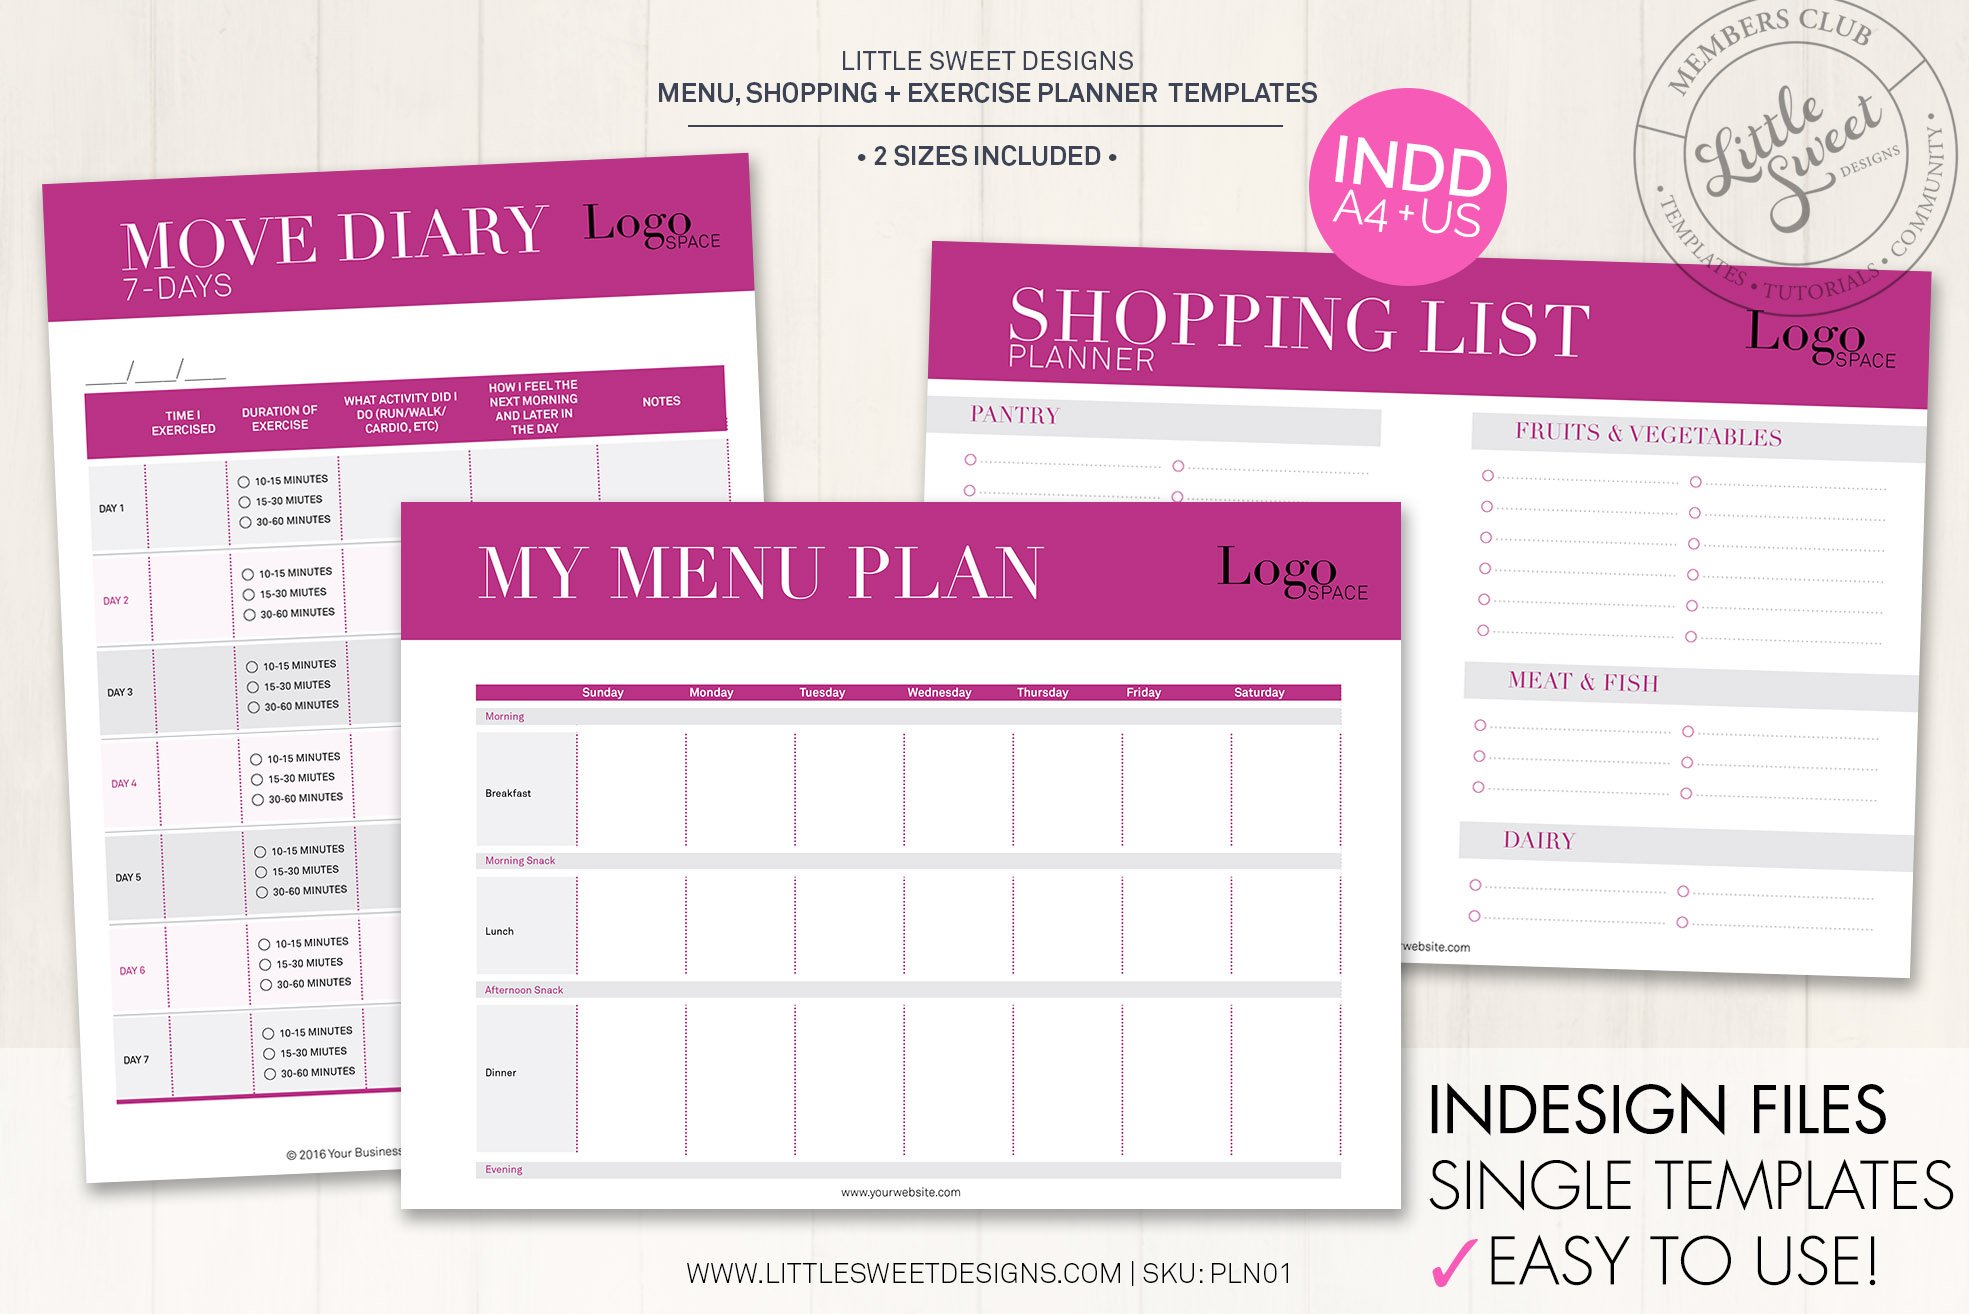 Menu, Shopping & Exercise Planner cover image.